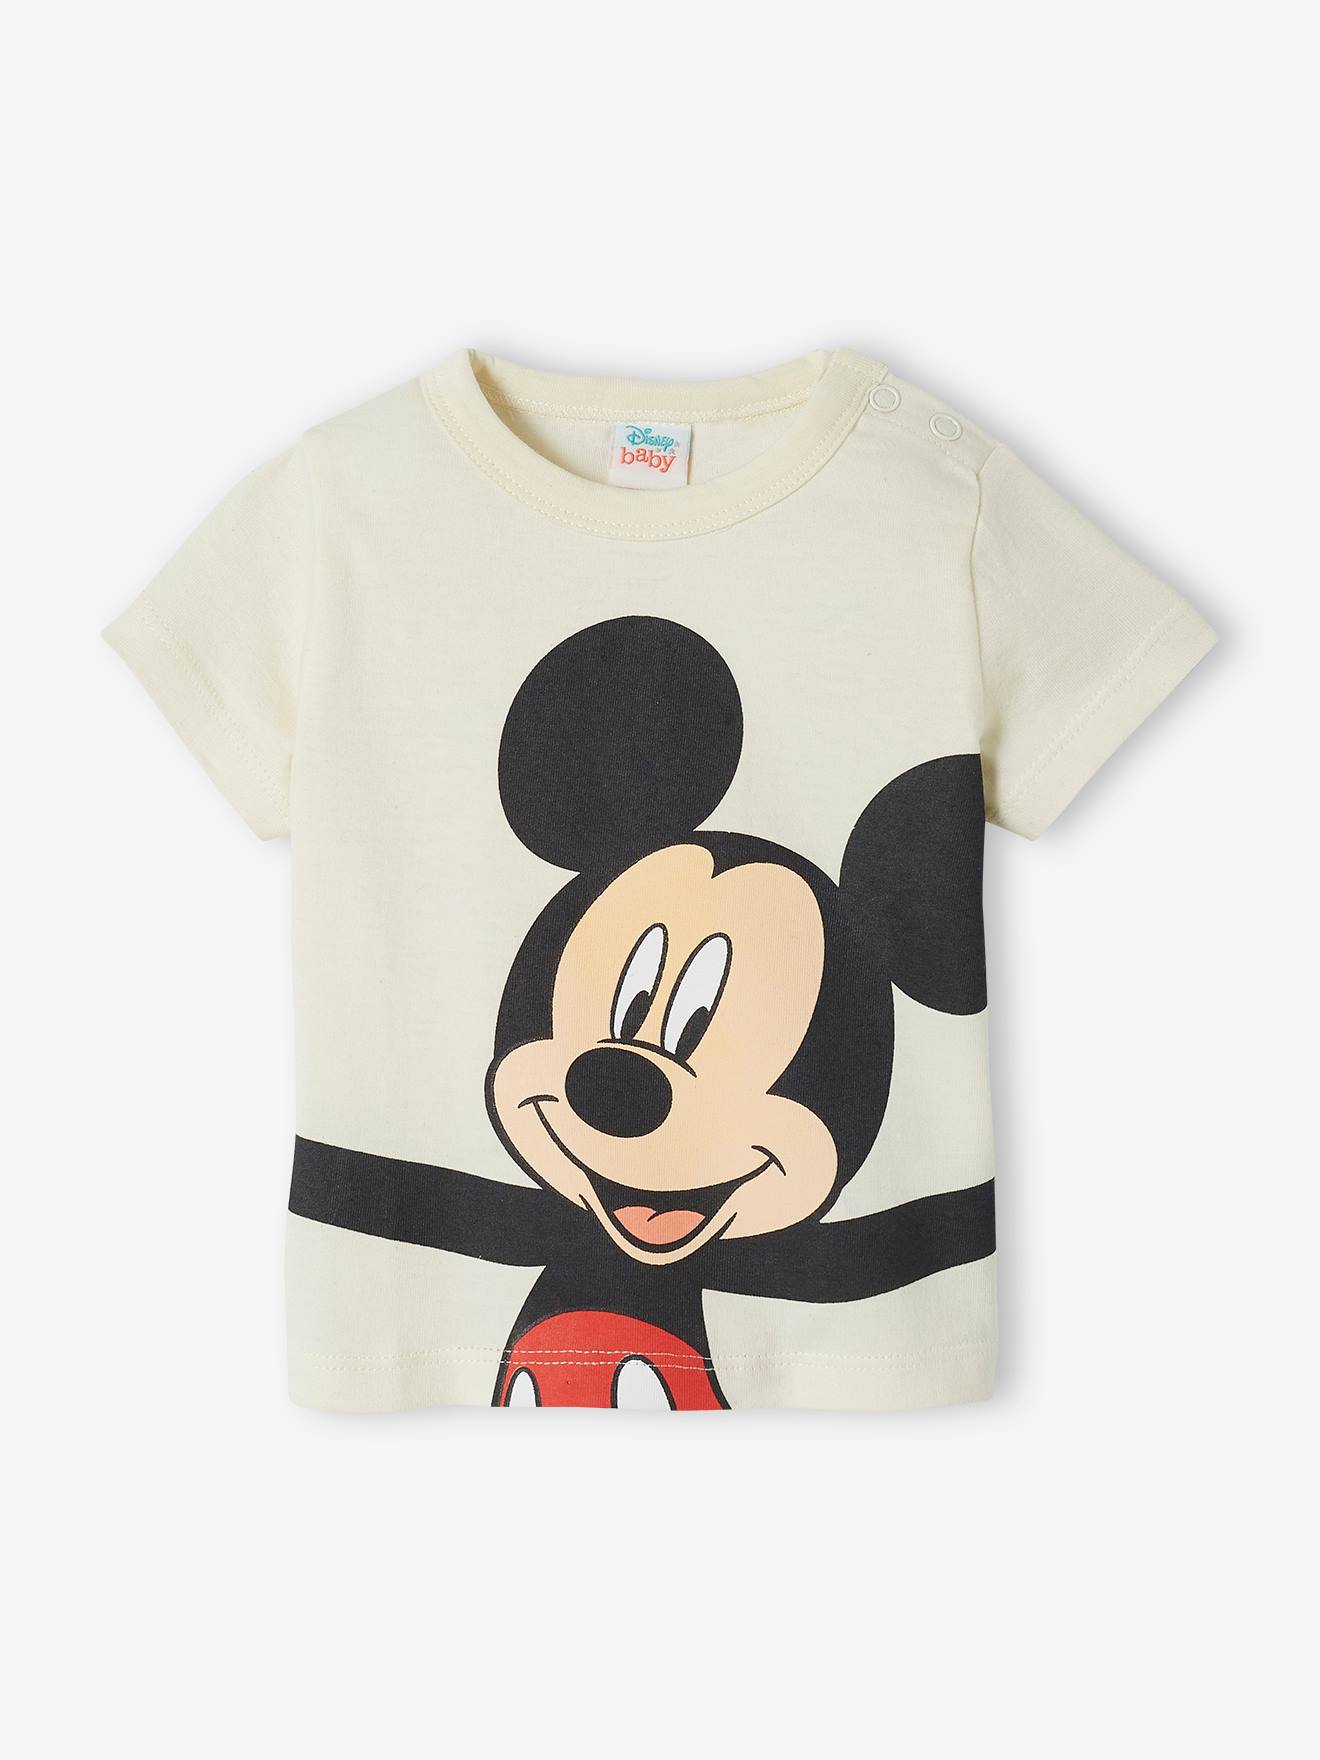 T-Shirt for Baby Boys, Mickey Mouse by Disney(r) ecru